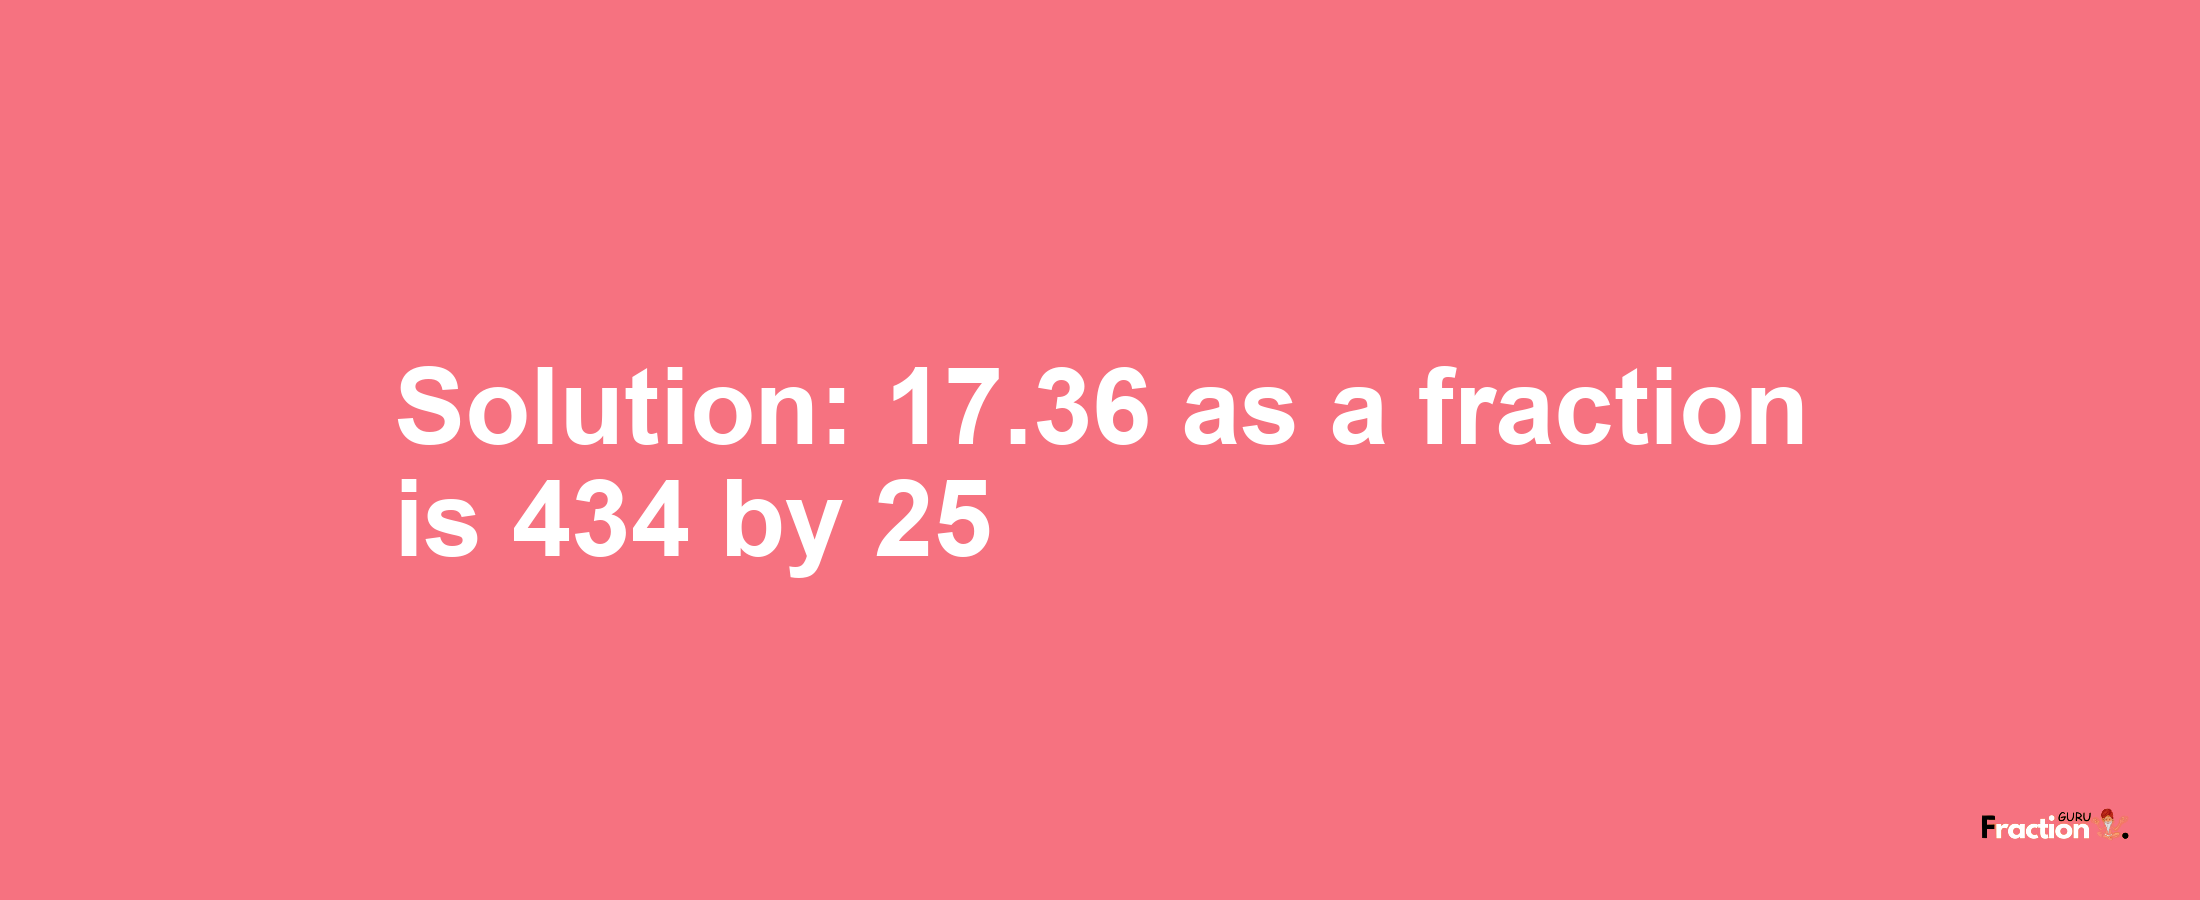 Solution:17.36 as a fraction is 434/25